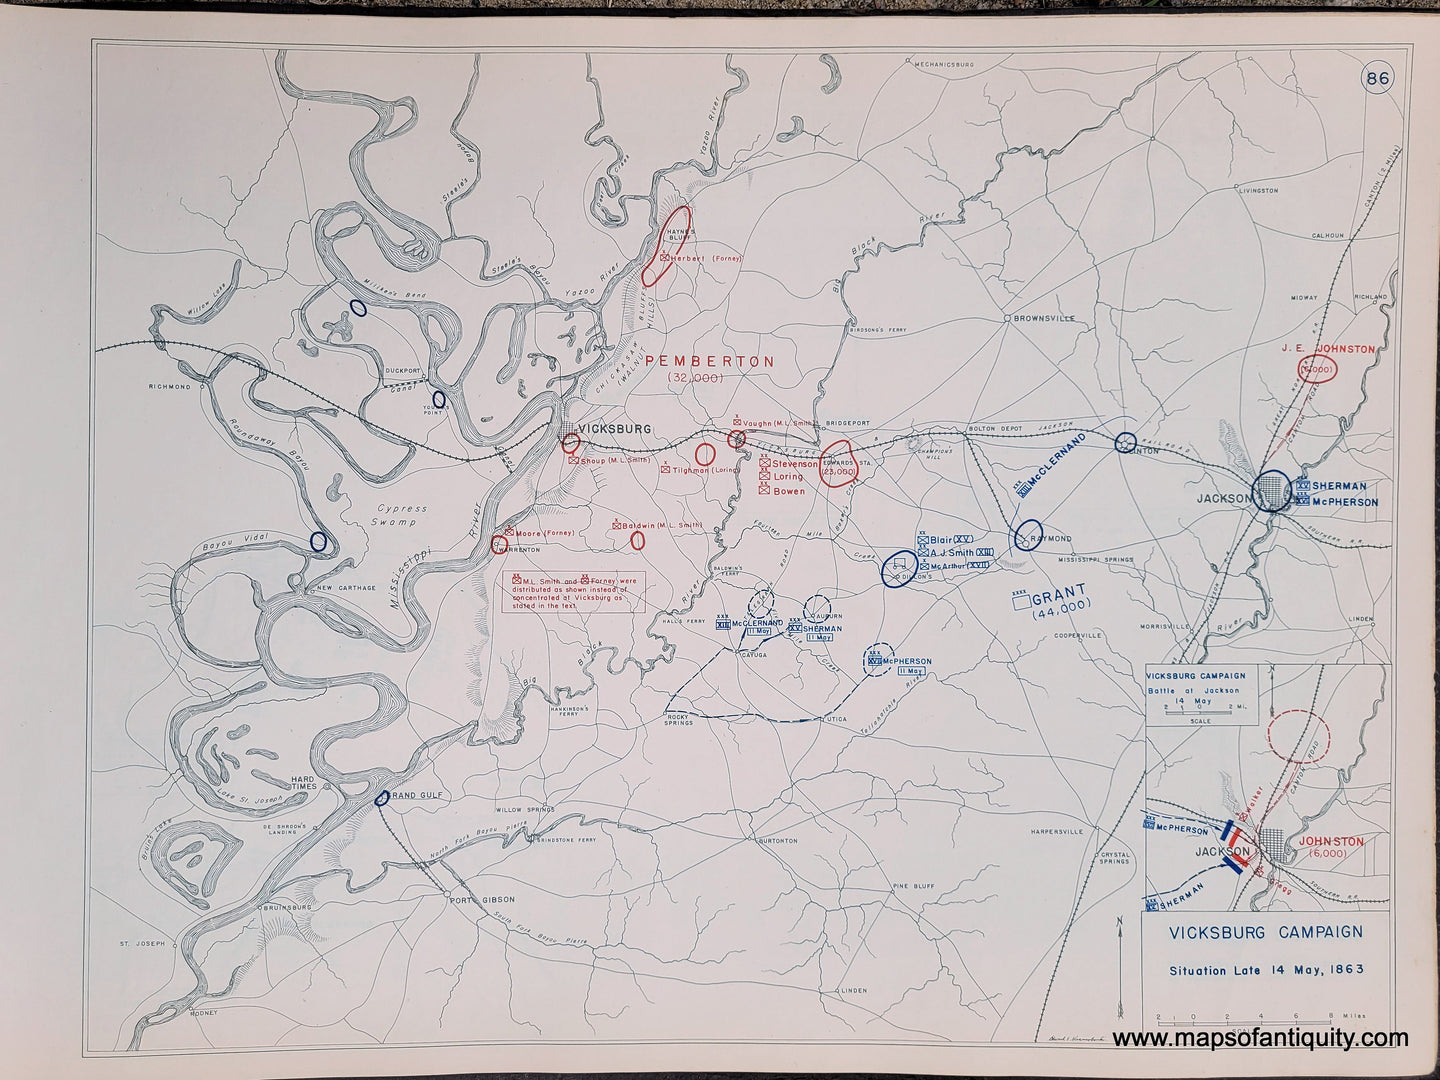 Genuine-Antique-Map-Vicksburg-Campaign-Situation-Late-14-May-1863-1948-Matthew-Forney-Steele-Dept-of-Military-Art-and-Engineering-US-Military-Academy-West-Point-Maps-Of-Antiquity